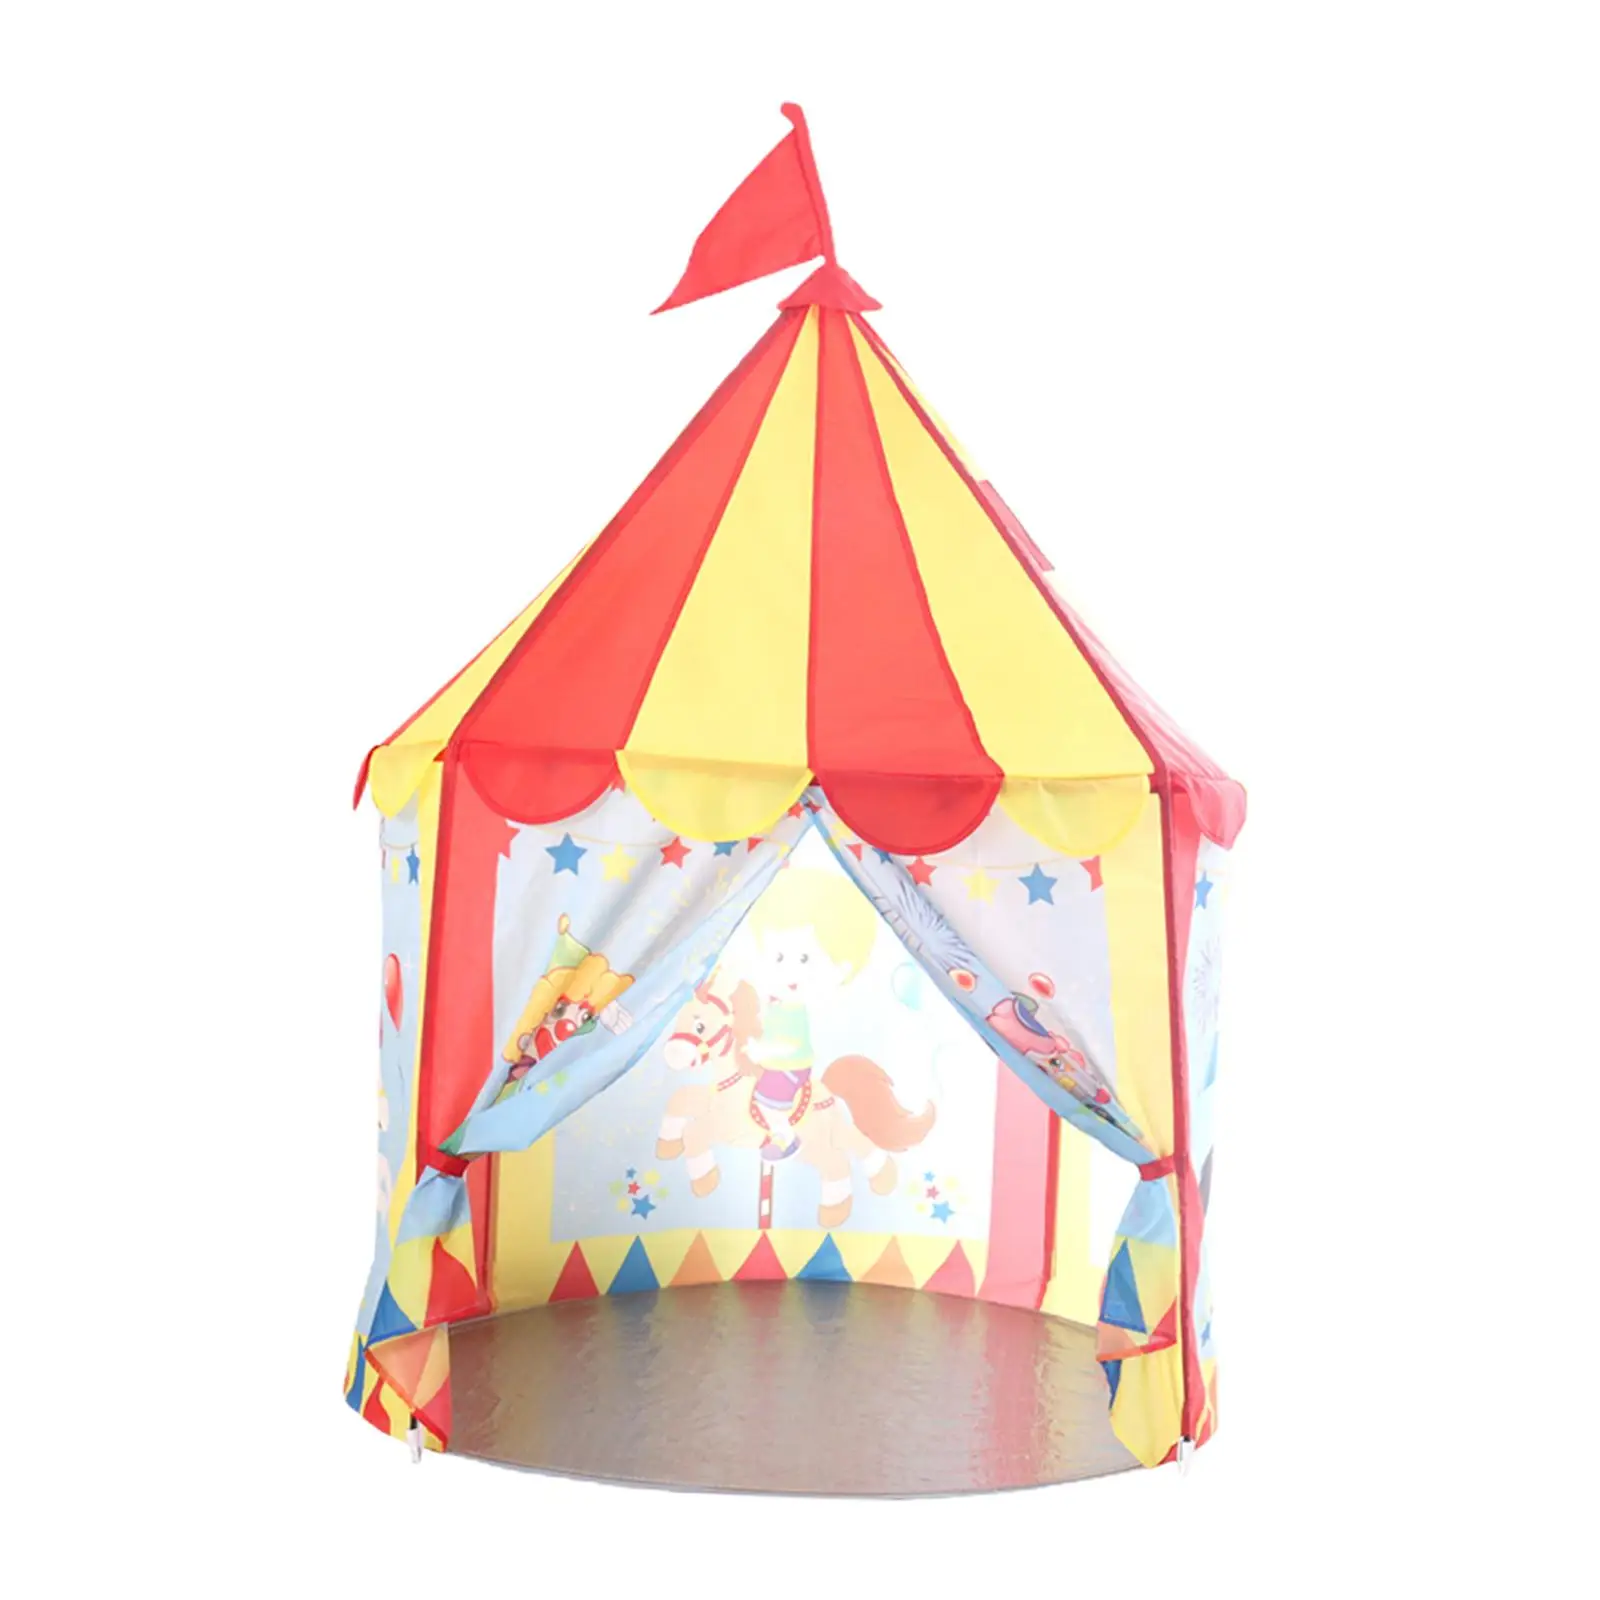 Play Tent House Best Gift Indoor Outdoor Use Play Teepee Princess Castle Playhouse Tent for garden Camping Yard Kids